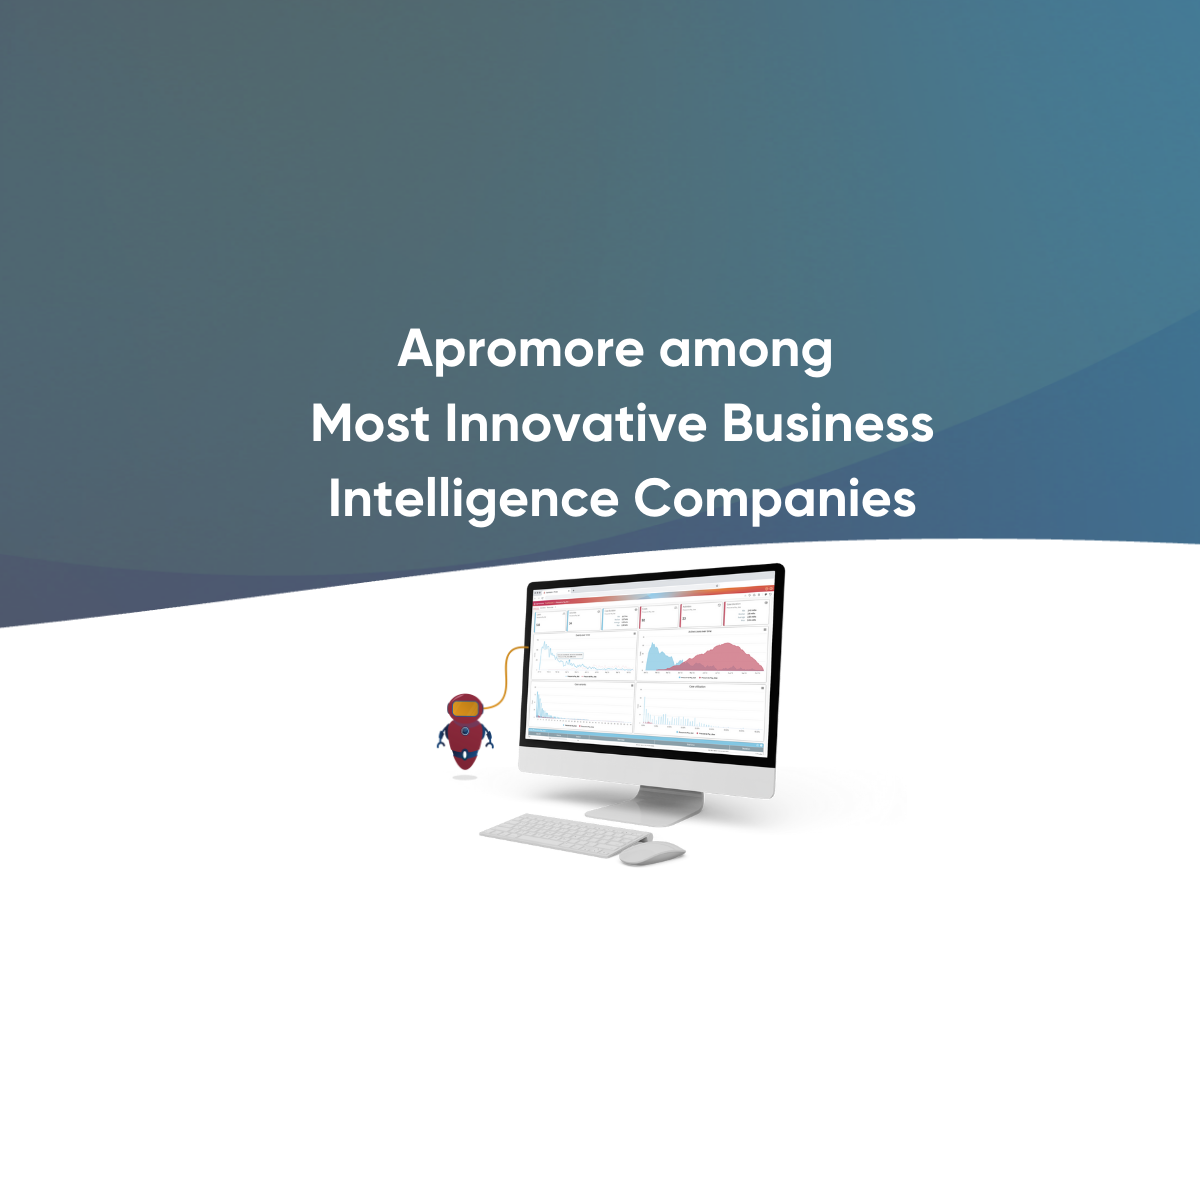 Apromore in Data Magazine: Among Most Innovative Business Intelligence Companies